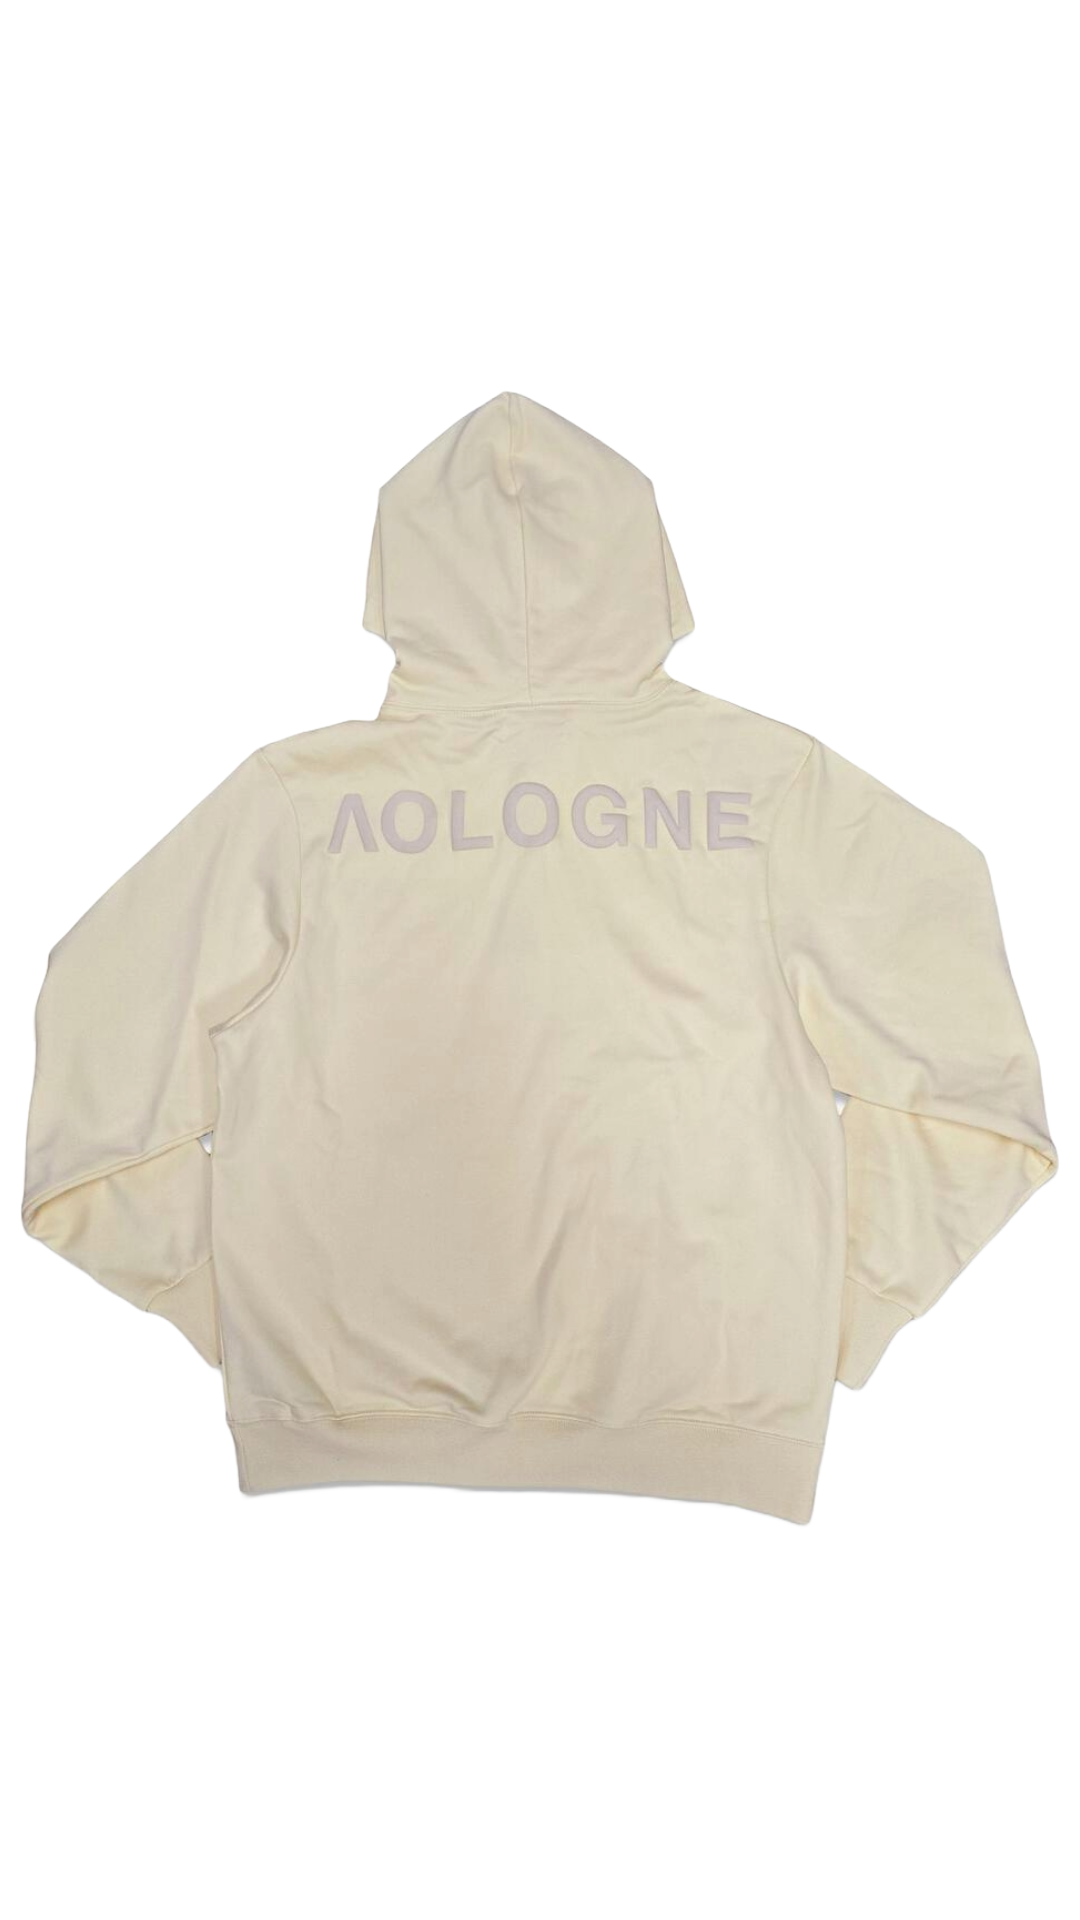 AOLOGNE "STAND ALONE" CREAM HOODIE